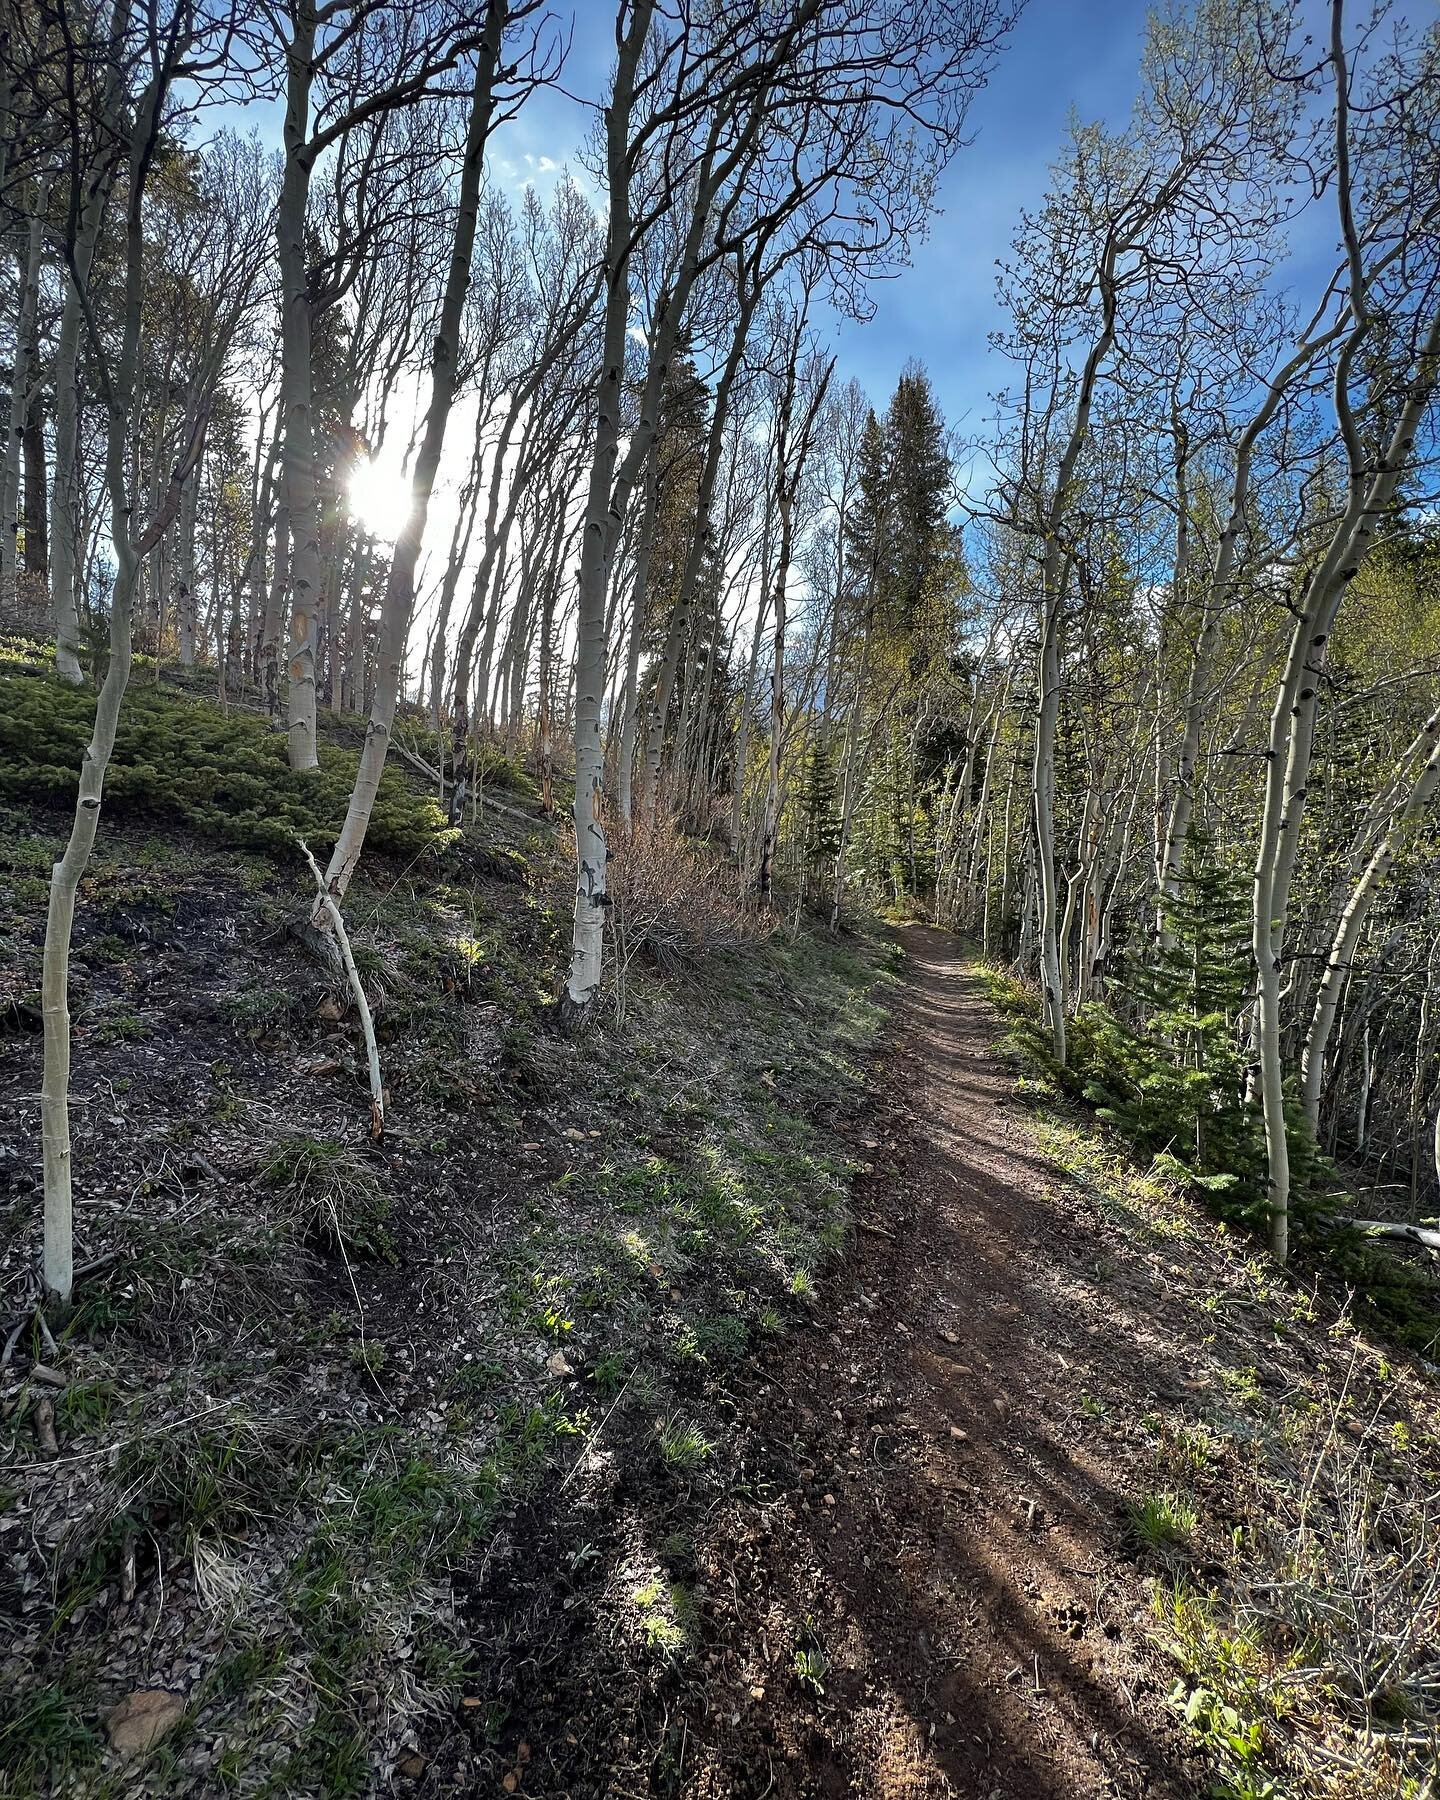 Took a quick hike this morning to confirm that spring is in fact still coming this year. The aspens in aspen alley are JUST starting to leaf but snow is in the forecast tonight. 

#breckenridgecolorado #breckenridge #colorado #summitcounty #summitcou